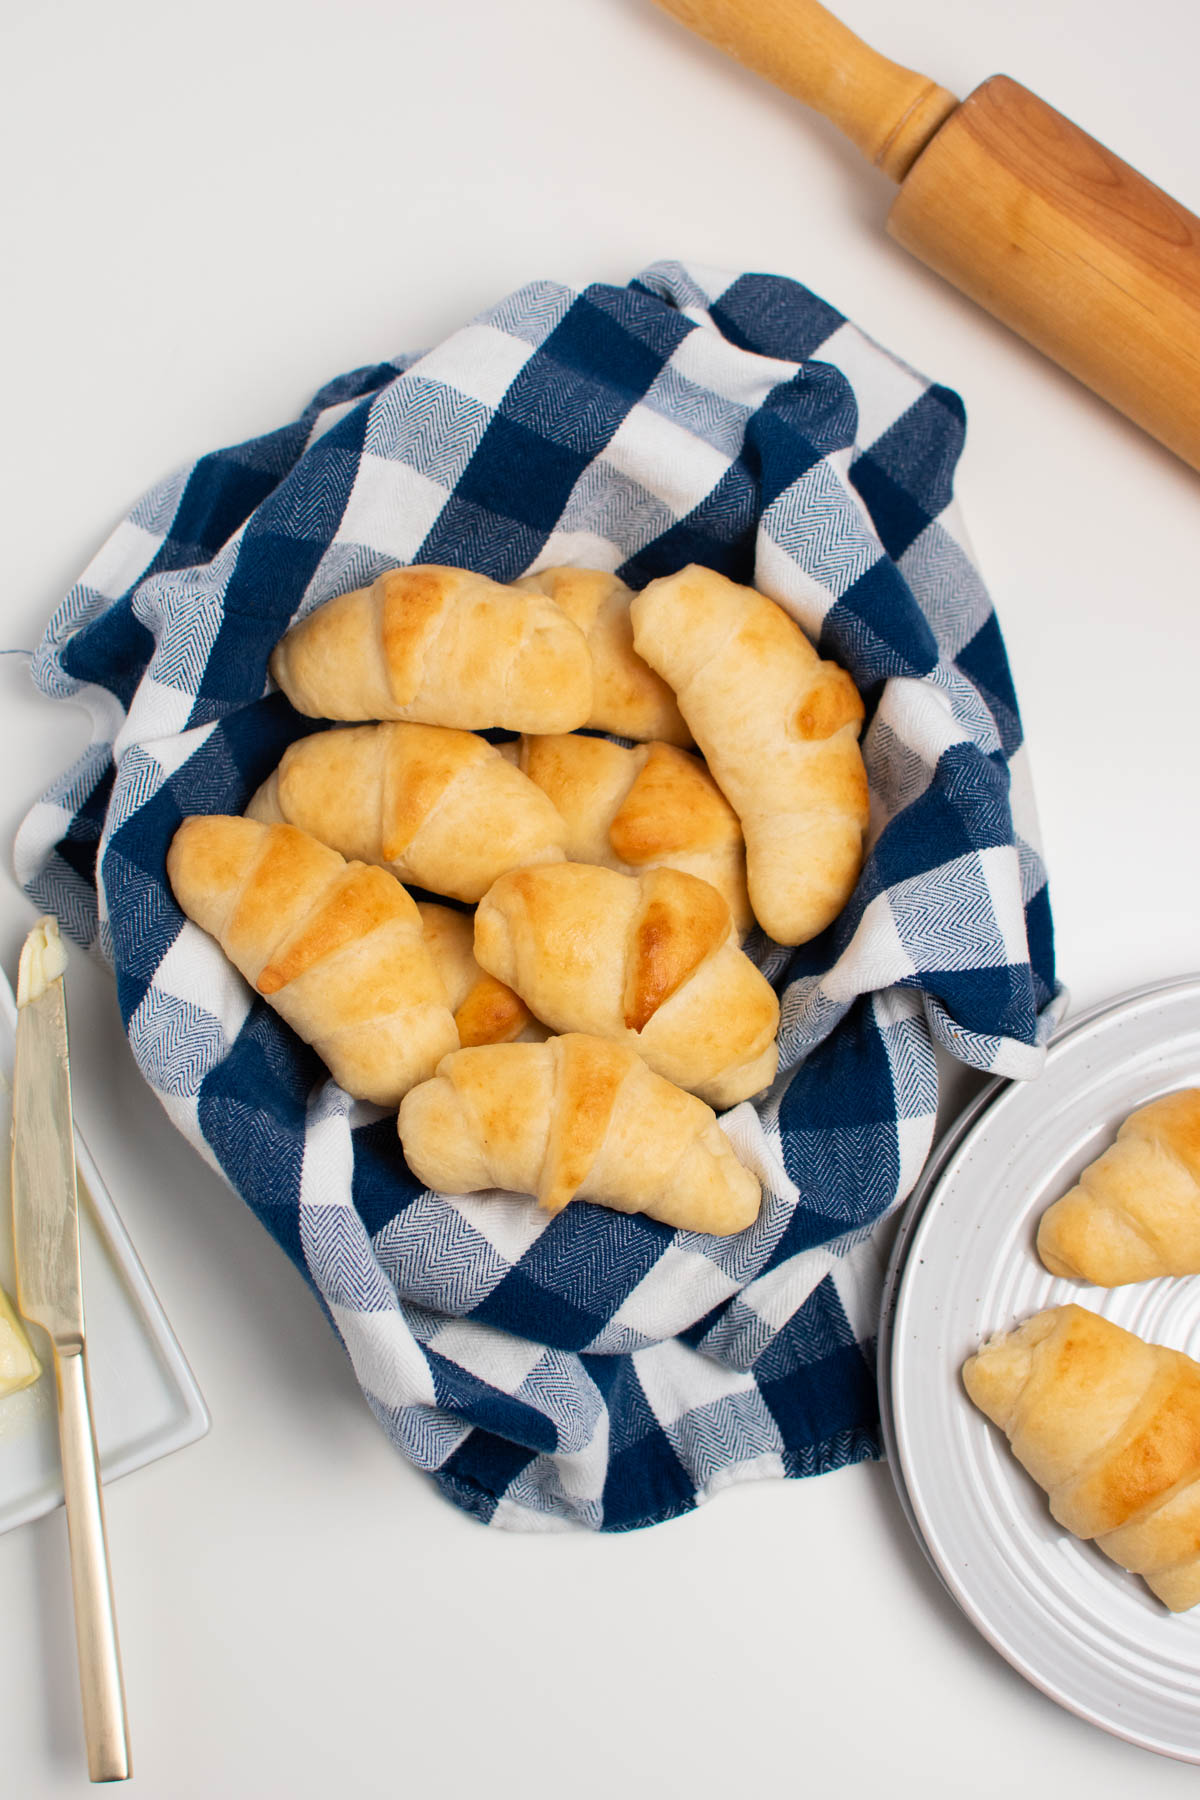 Several crescent rolls in bowl with blue checkered towel on white table.